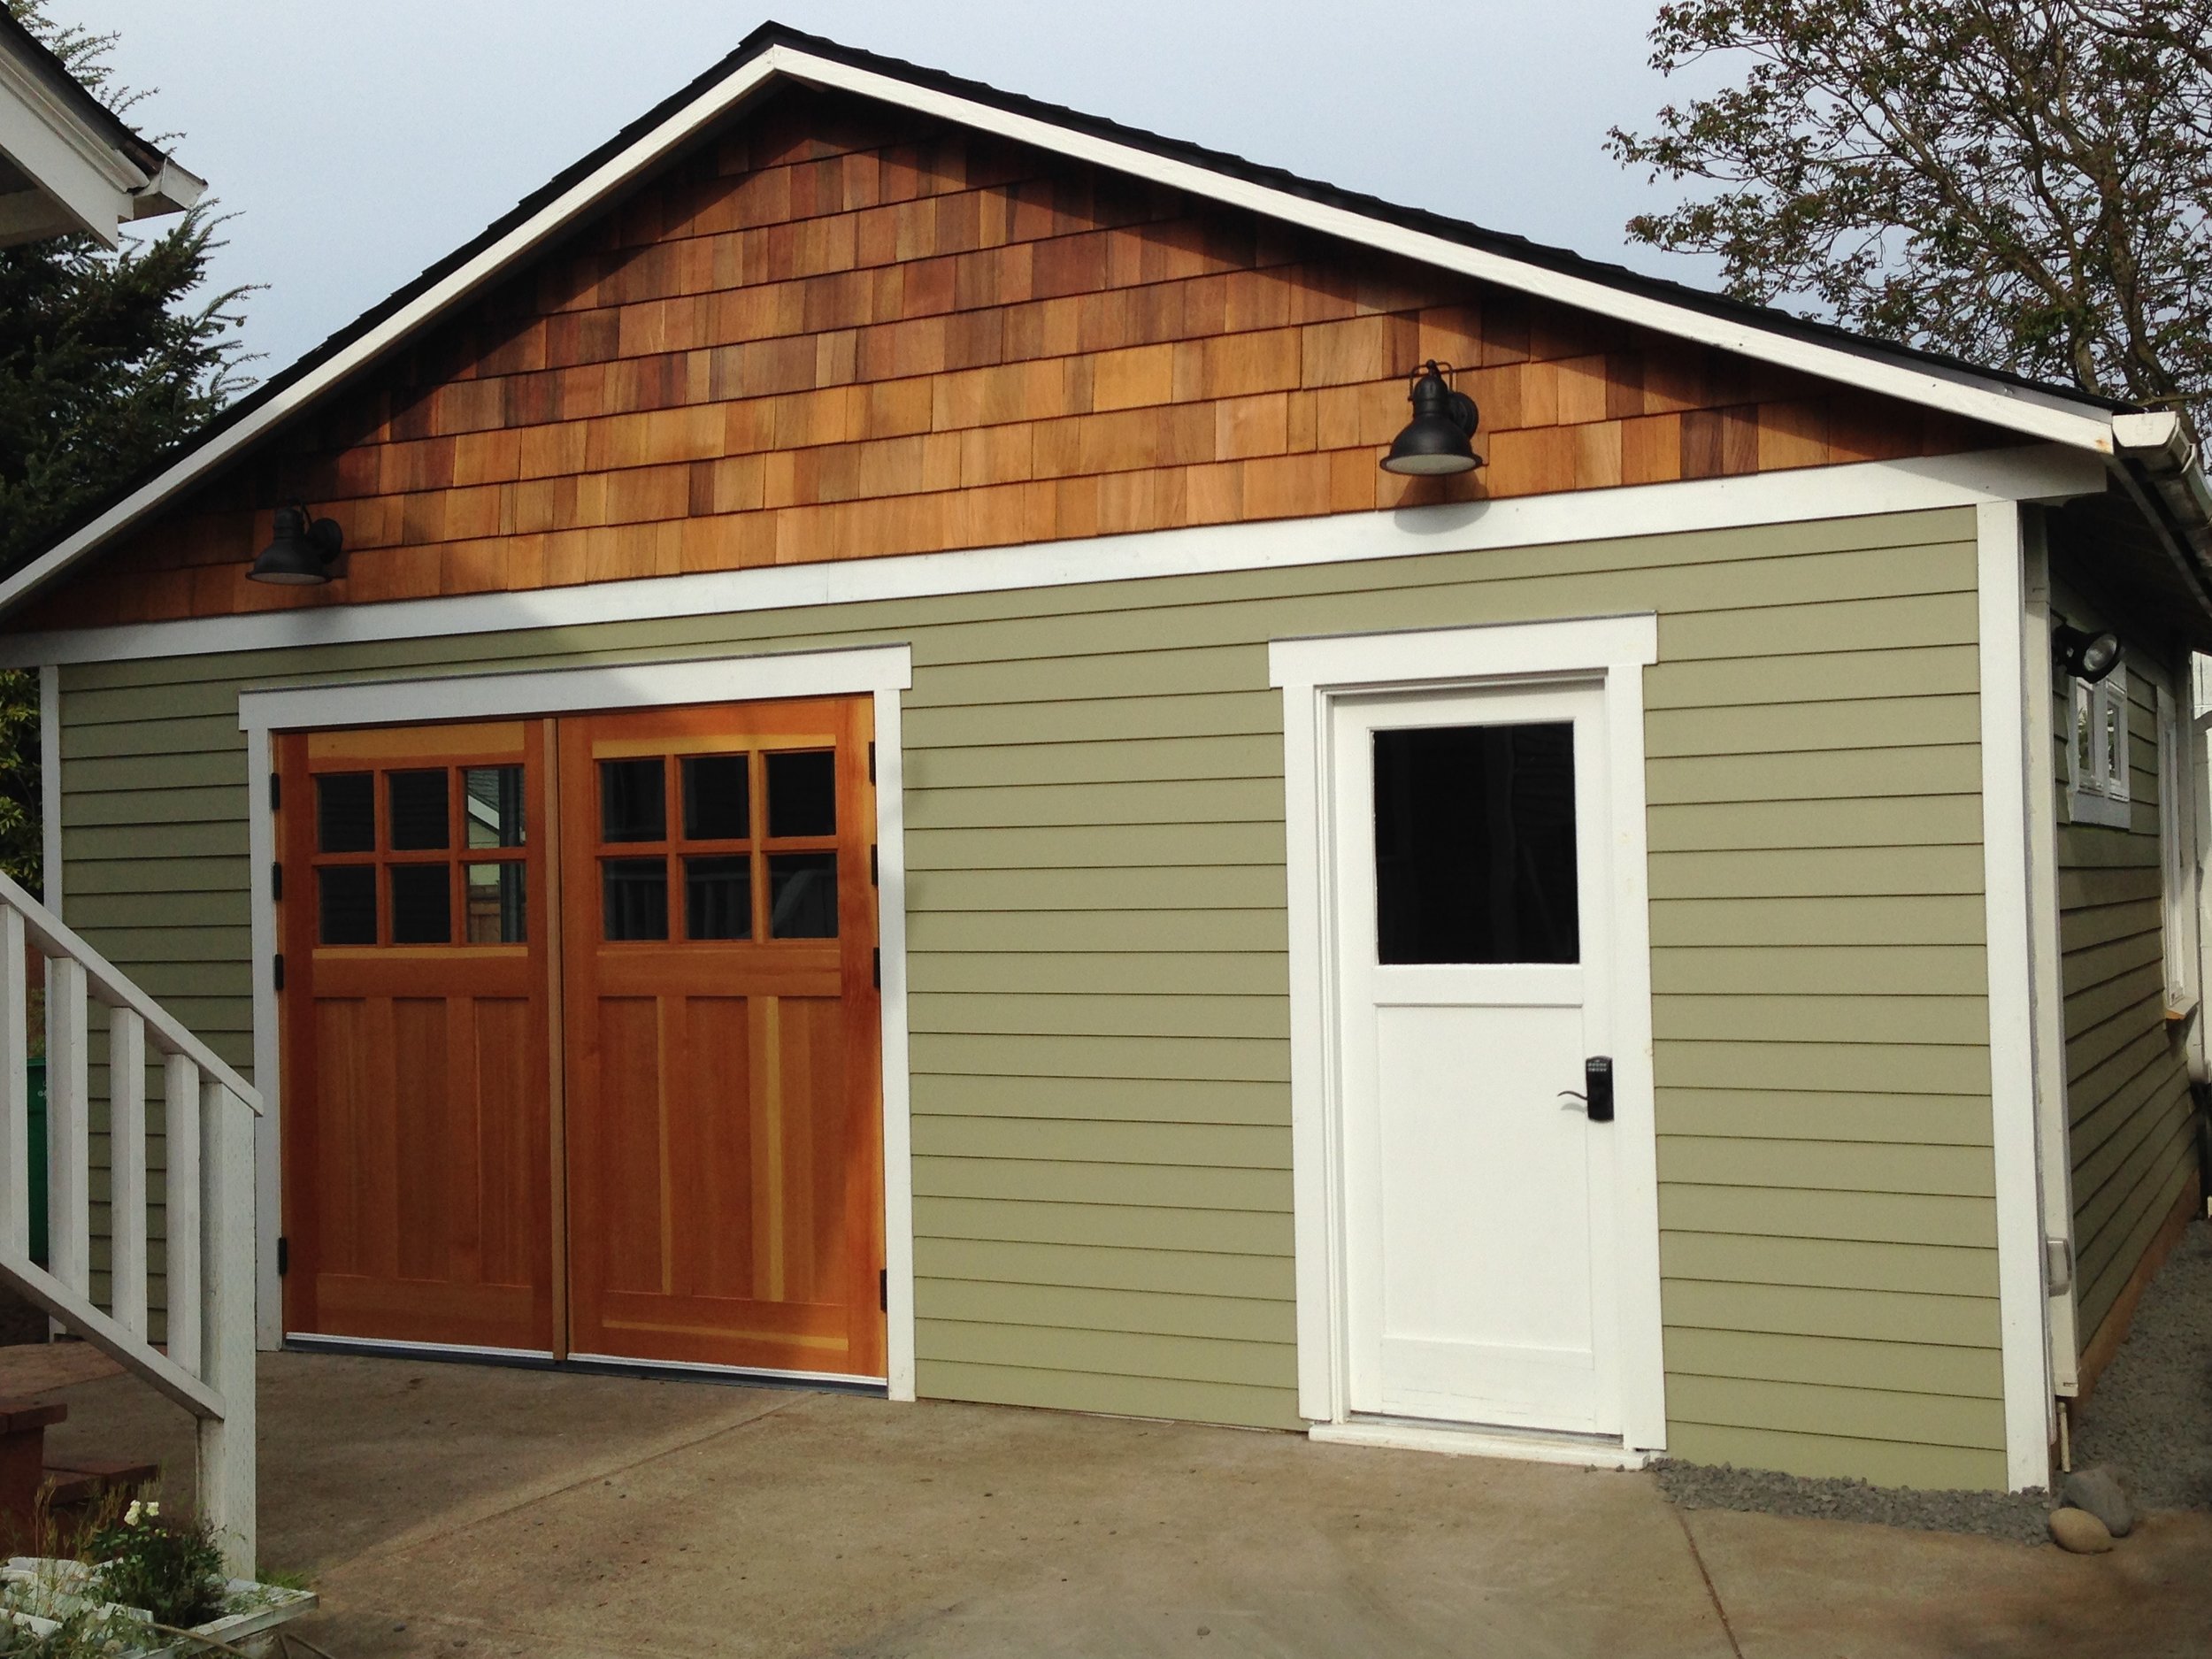 How To Save Money With A Garage Conversion Adu Building An Adu